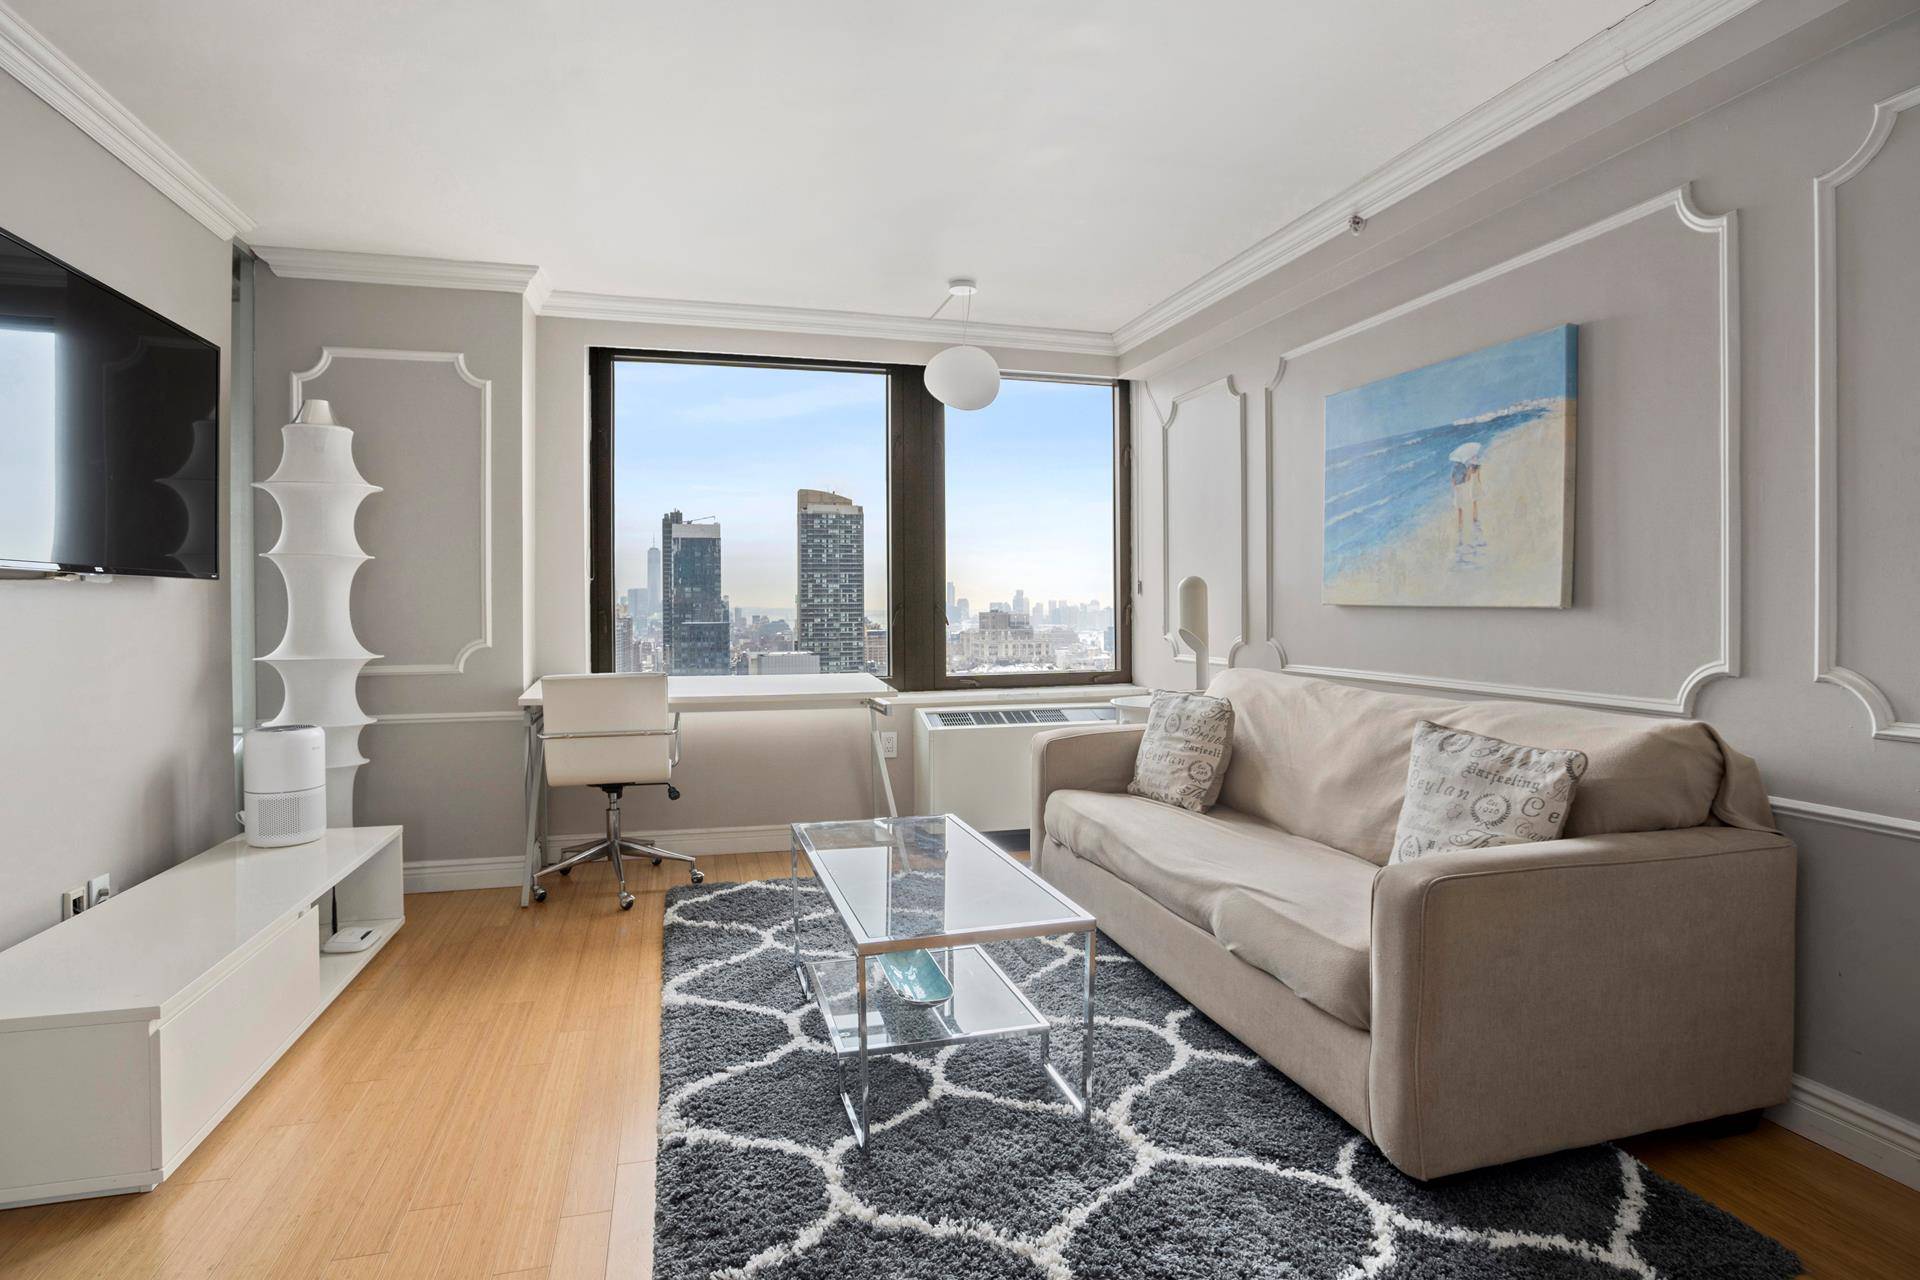 This FULLY FURNISHED one bedroom perched on 43 floor with breathtaking view is right below the Penthouse floor in Bryant Park Tower.